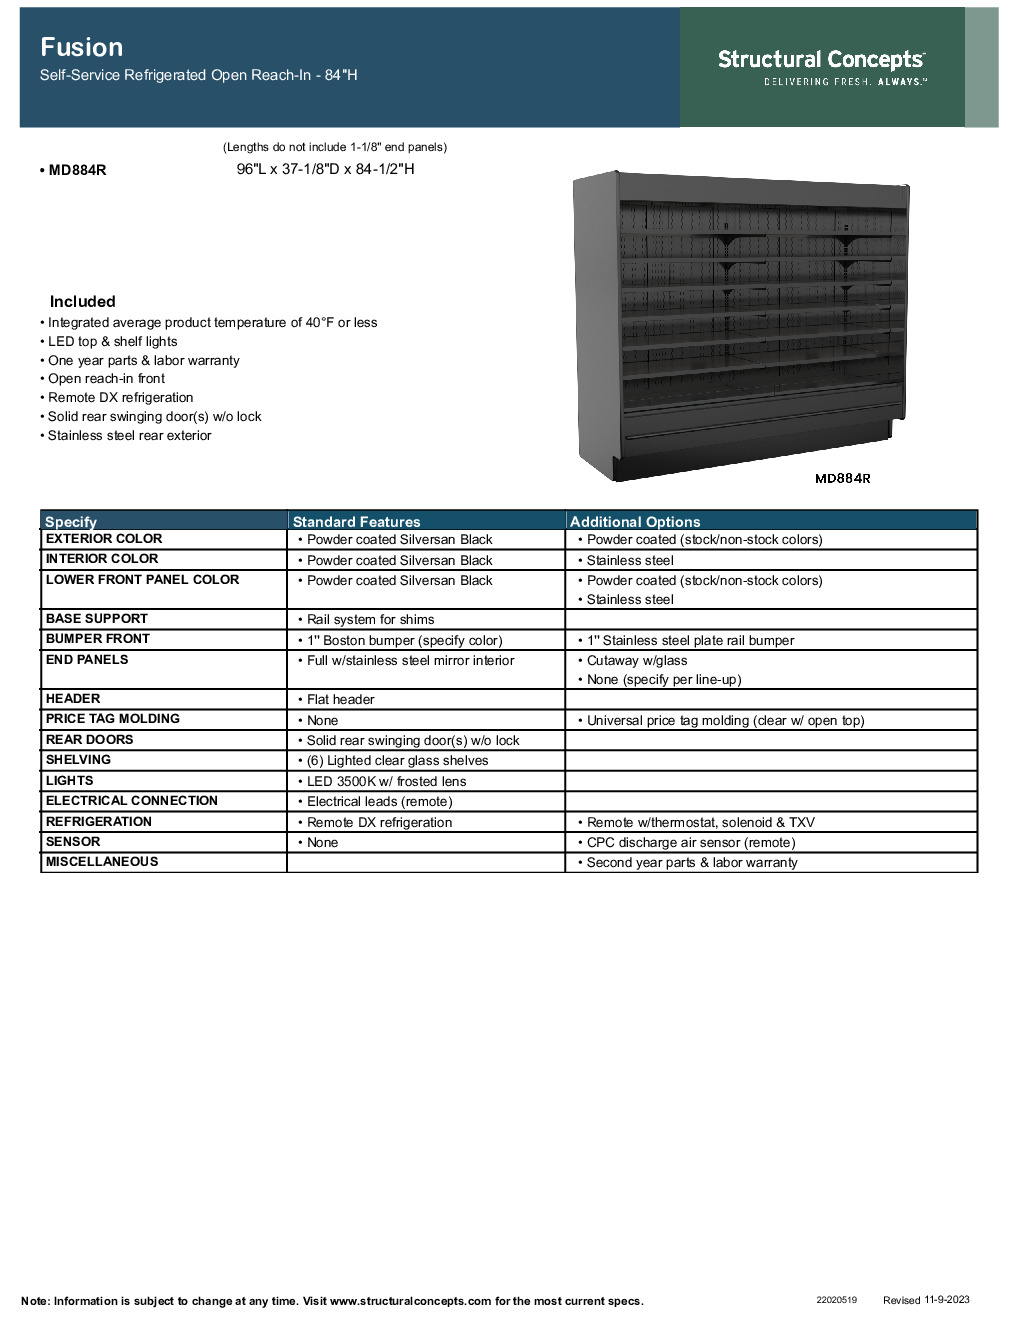 Structural Concepts MD884R Self-Serve Refrigerated Display Case